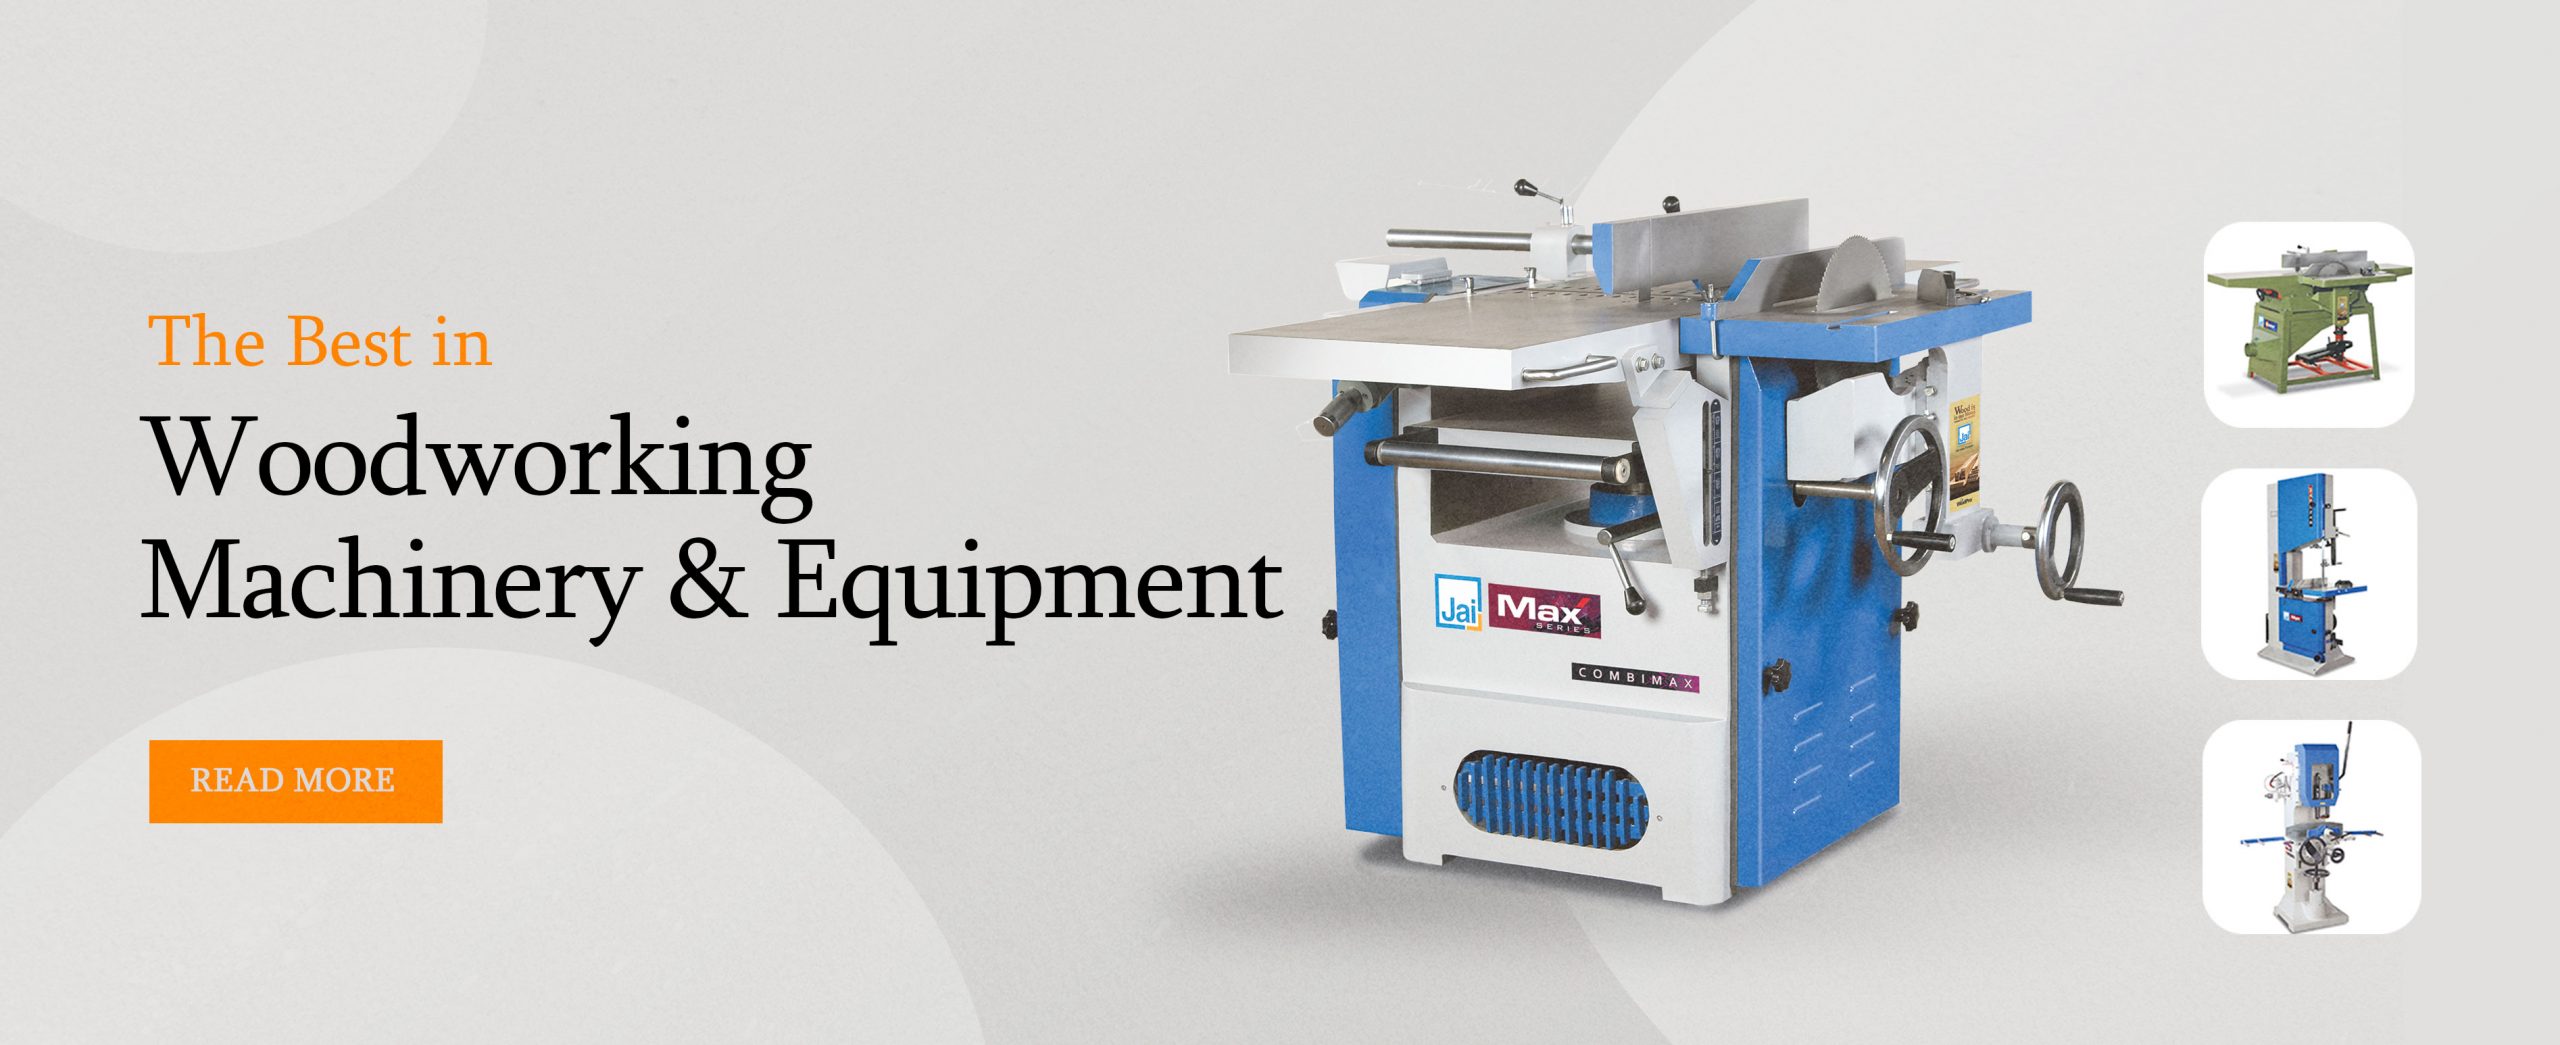 The Best in Woodworking Machinery & Equipment